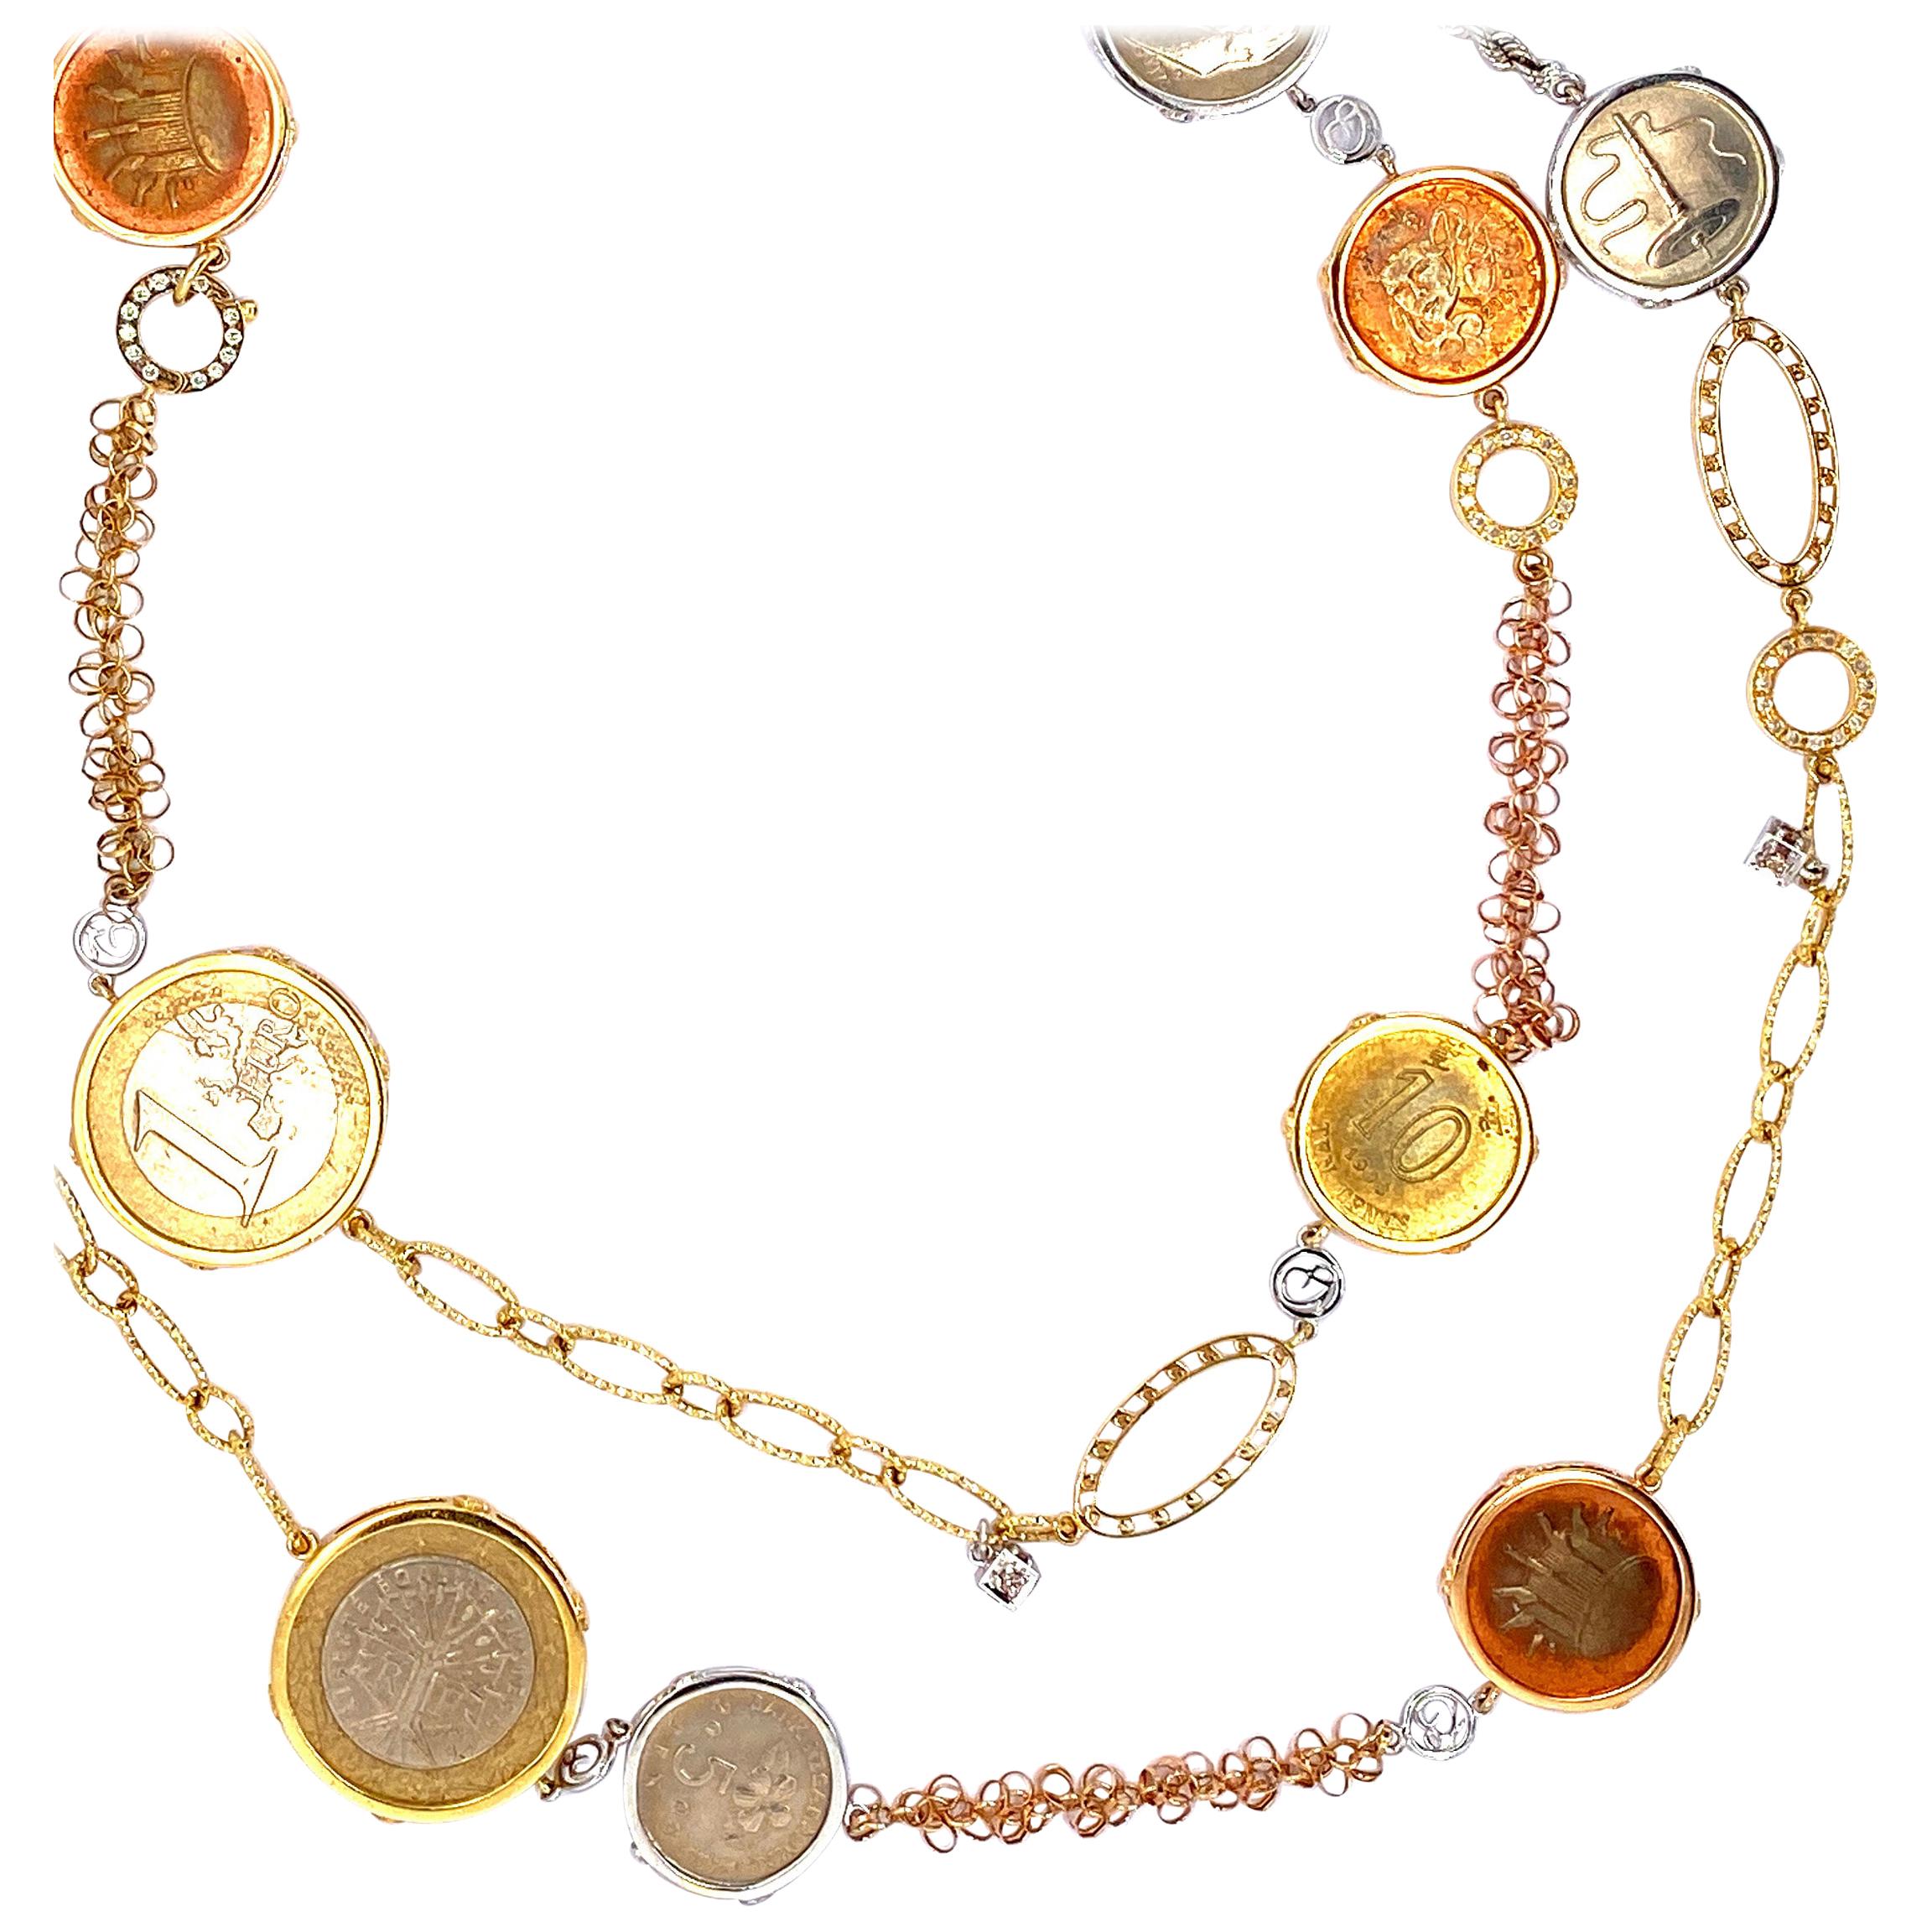 Detachable Traveler's Coin and Diamond Chain Necklace in 18 Karat Gold